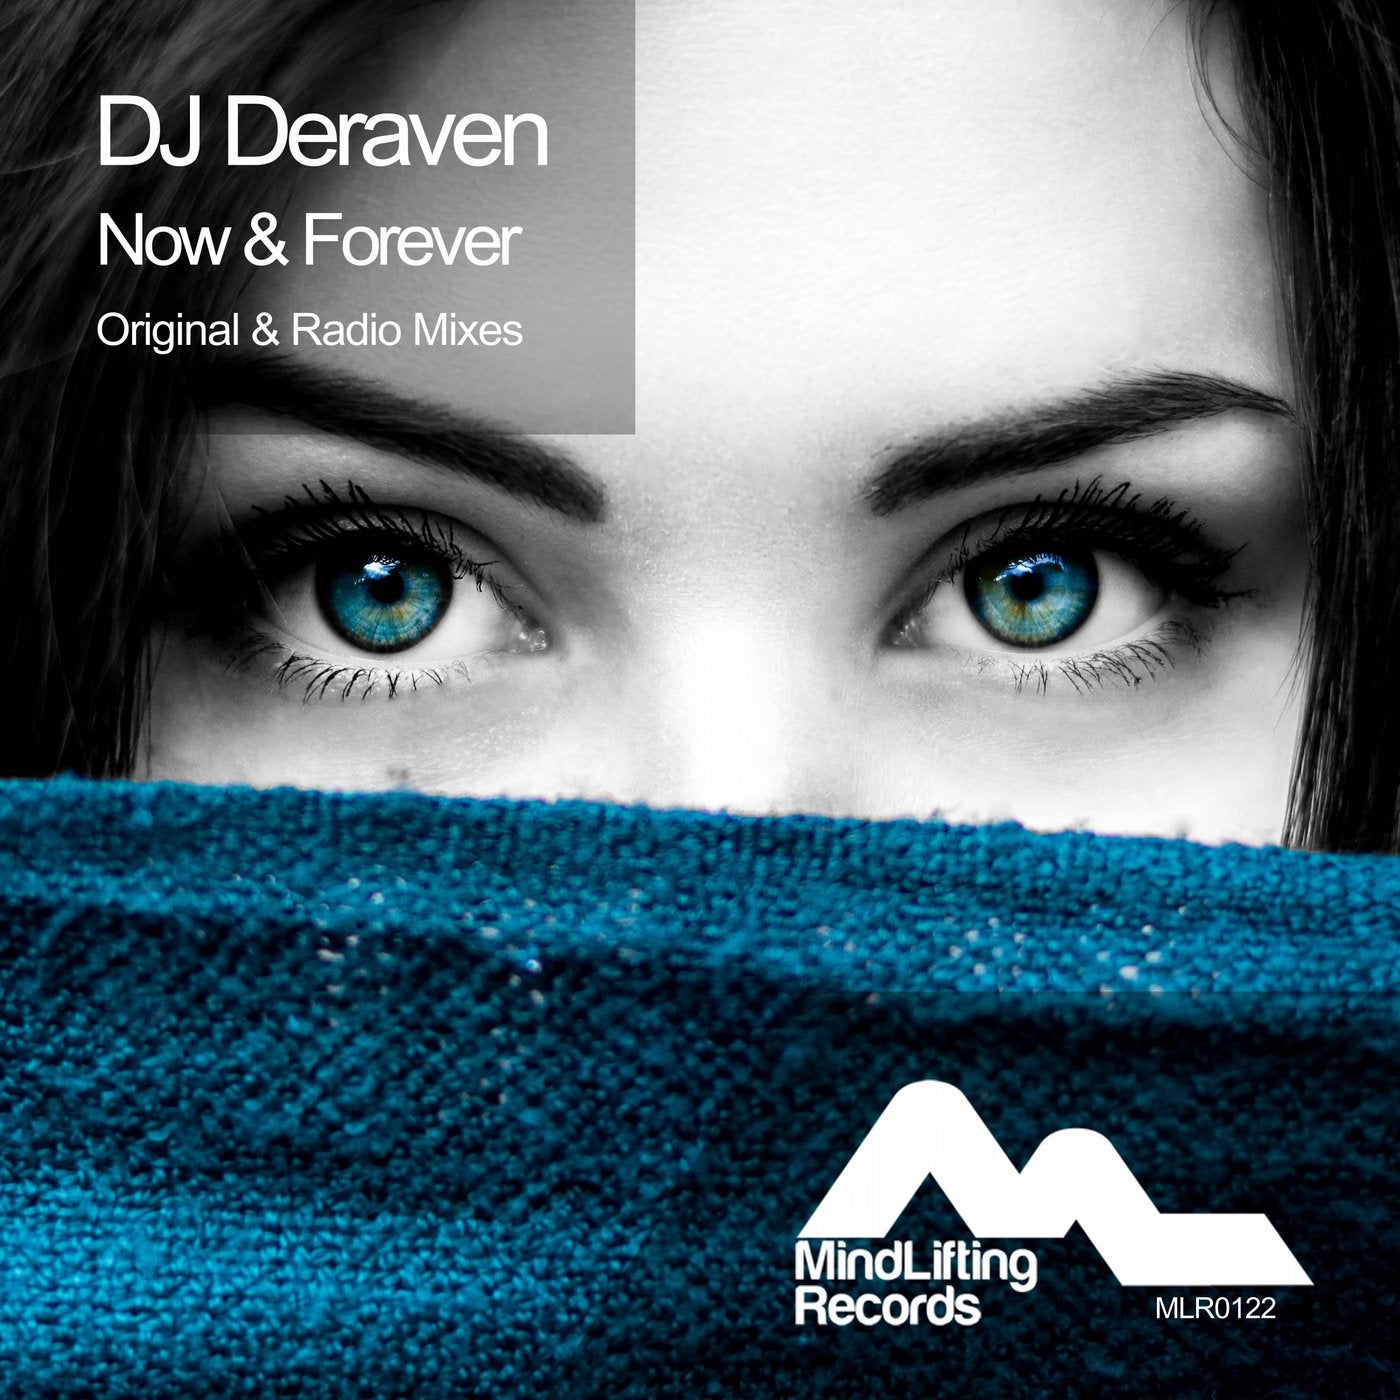 Deraven. Forever Original. To you Now and Forever. From Now on and Forever.